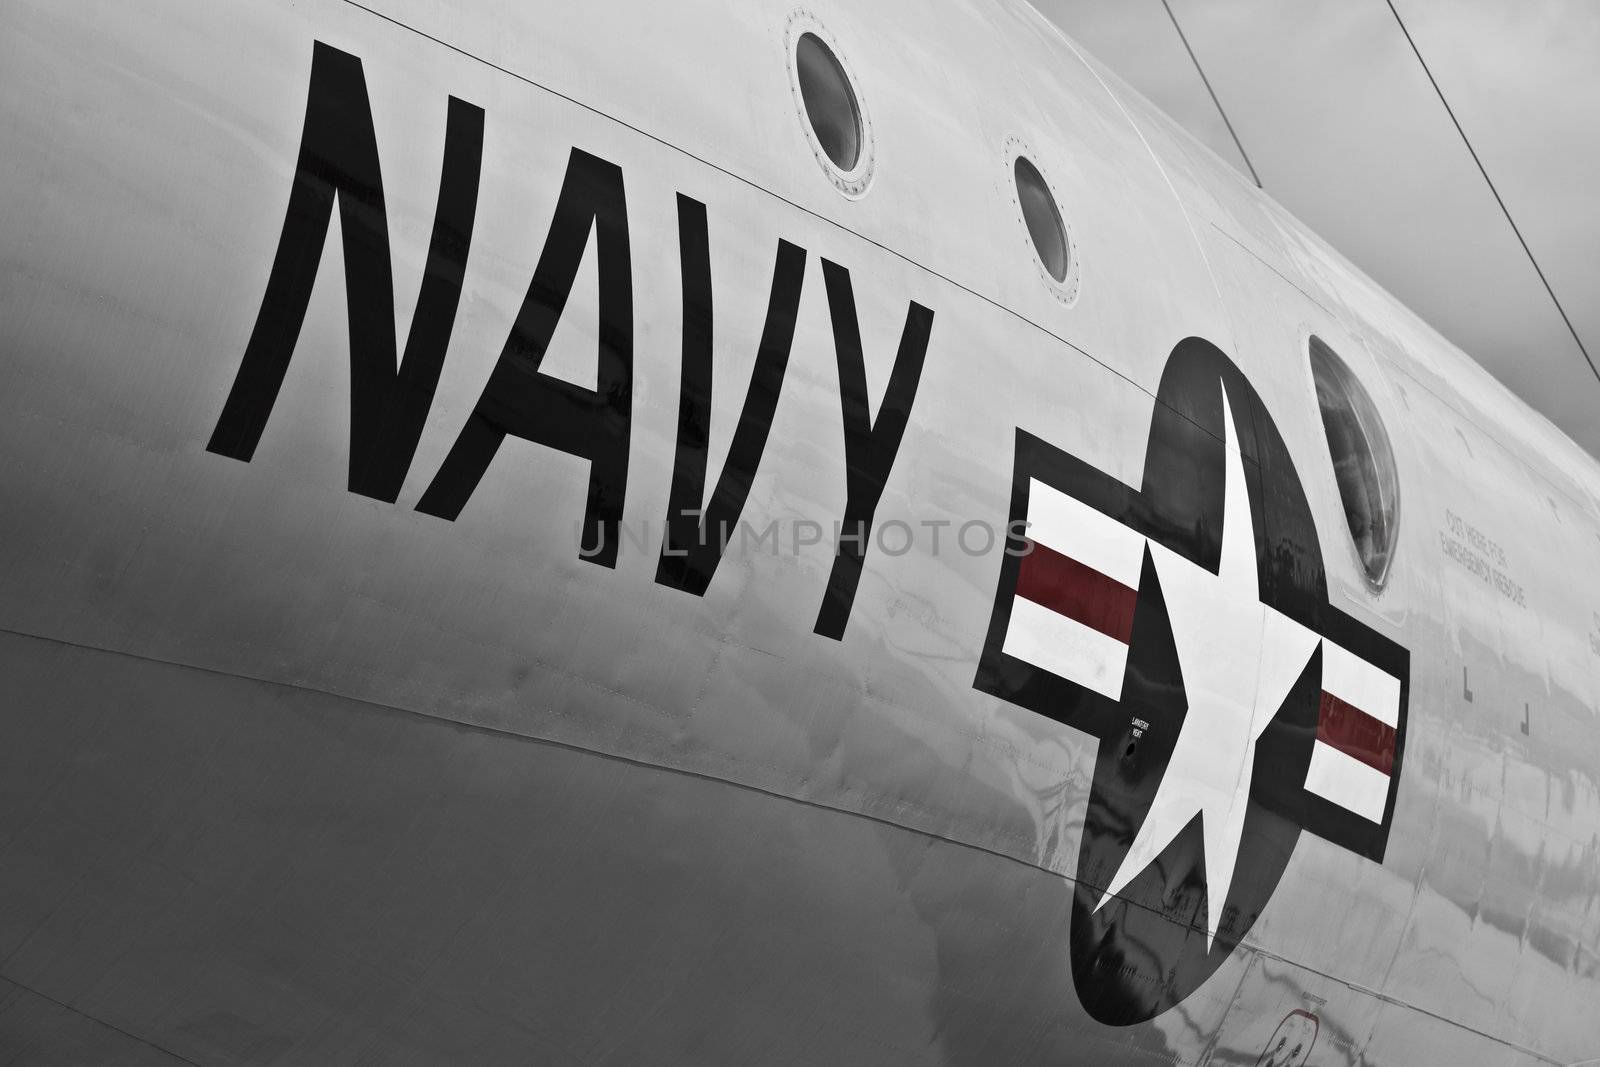 LUQA, MALTA - 25 SEP - USAF NAvy lettering on fuselage of military aircraft